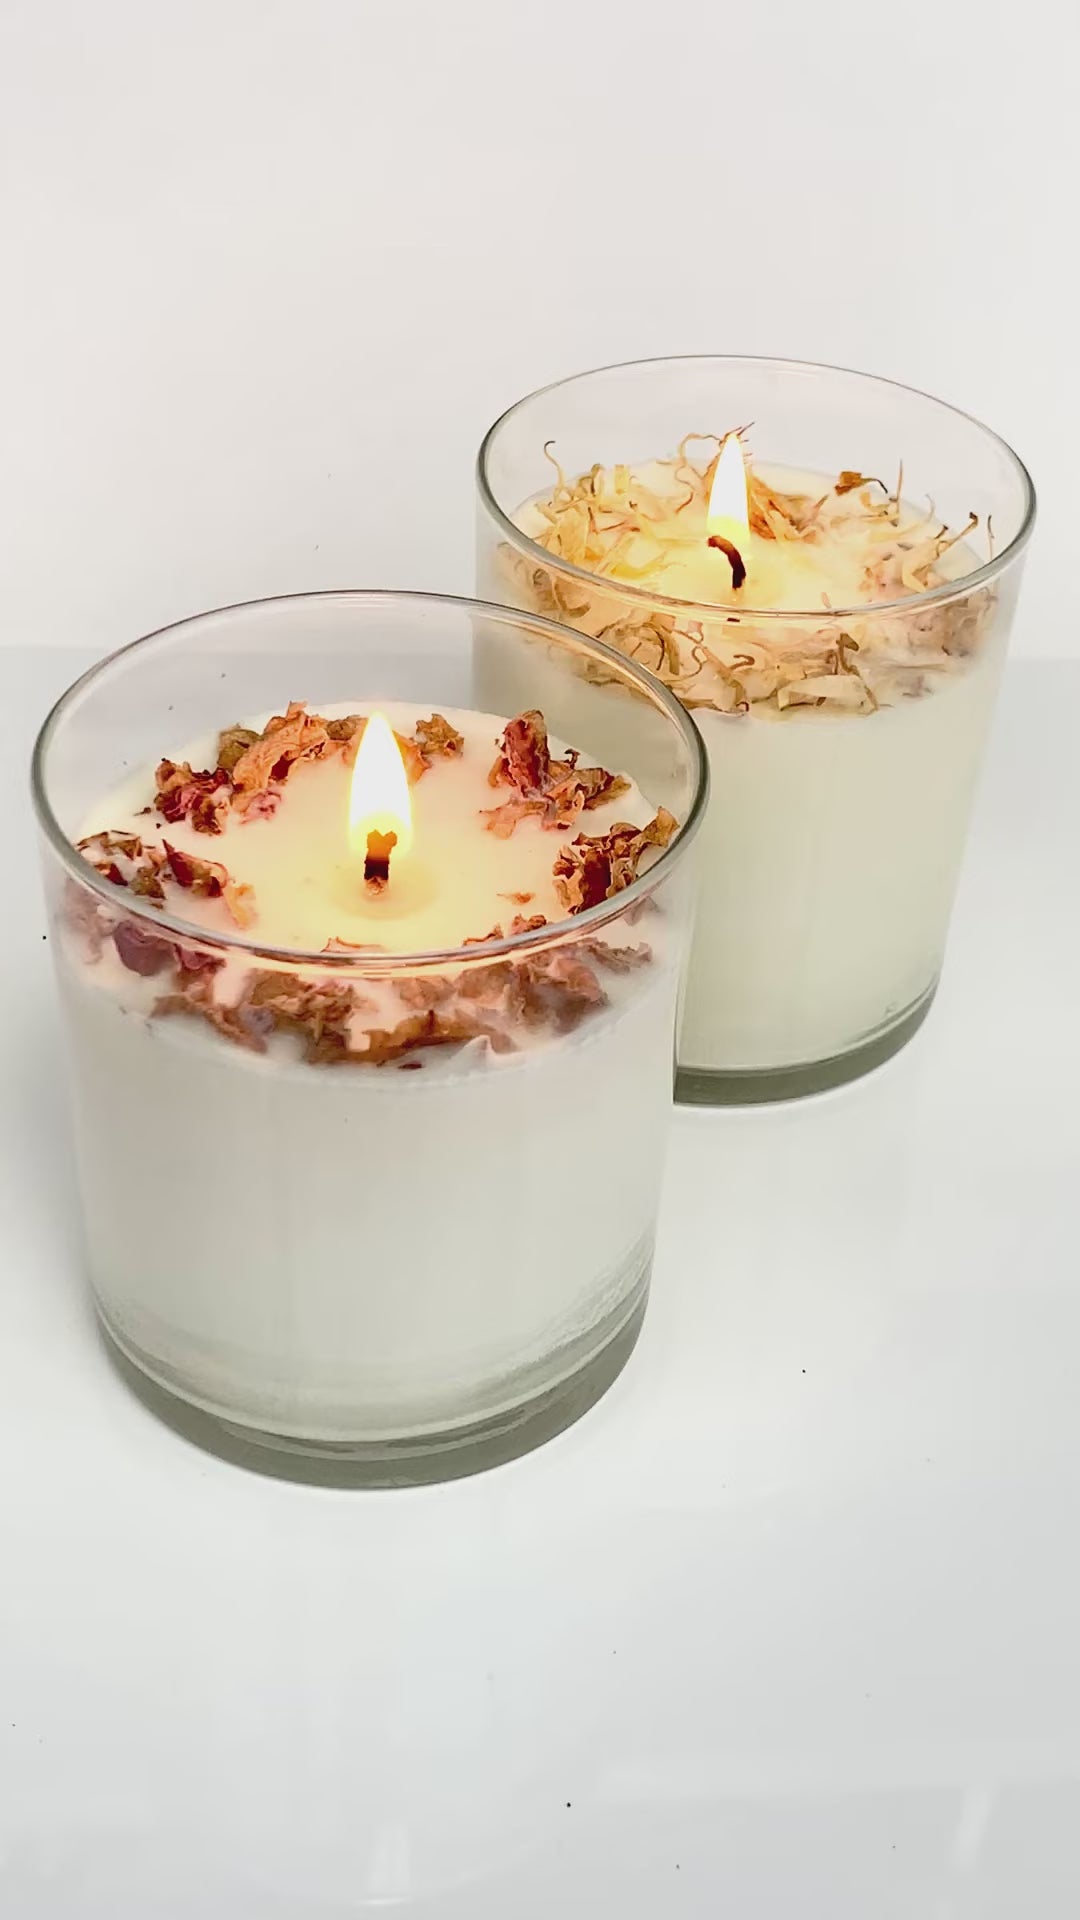 Nourish &amp; Essential Soy Wax Candles